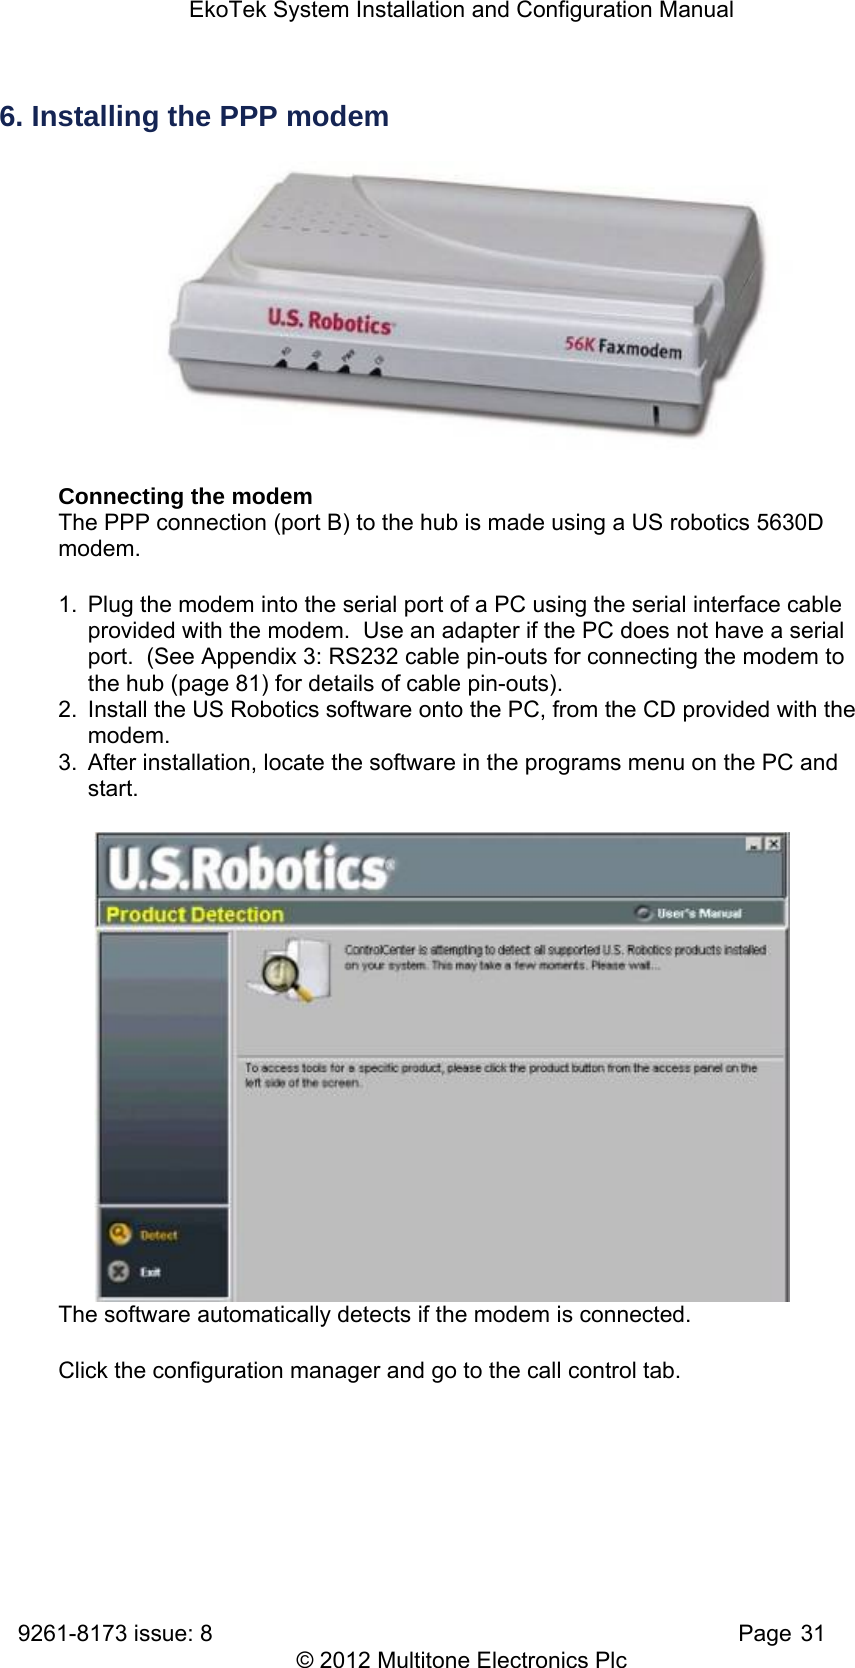 EkoTek System Installation and Configuration Manual 9261-8173 issue: 8   Page 31 © 2012 Multitone Electronics Plc 6. Installing the PPP modem  Connecting the modem The PPP connection (port B) to the hub is made using a US robotics 5630D modem. 1.  Plug the modem into the serial port of a PC using the serial interface cable provided with the modem.  Use an adapter if the PC does not have a serial port.  (See Appendix 3: RS232 cable pin-outs for connecting the modem to the hub (page 81) for details of cable pin-outs). 2.  Install the US Robotics software onto the PC, from the CD provided with the modem. 3.  After installation, locate the software in the programs menu on the PC and start. The software automatically detects if the modem is connected. Click the configuration manager and go to the call control tab. 